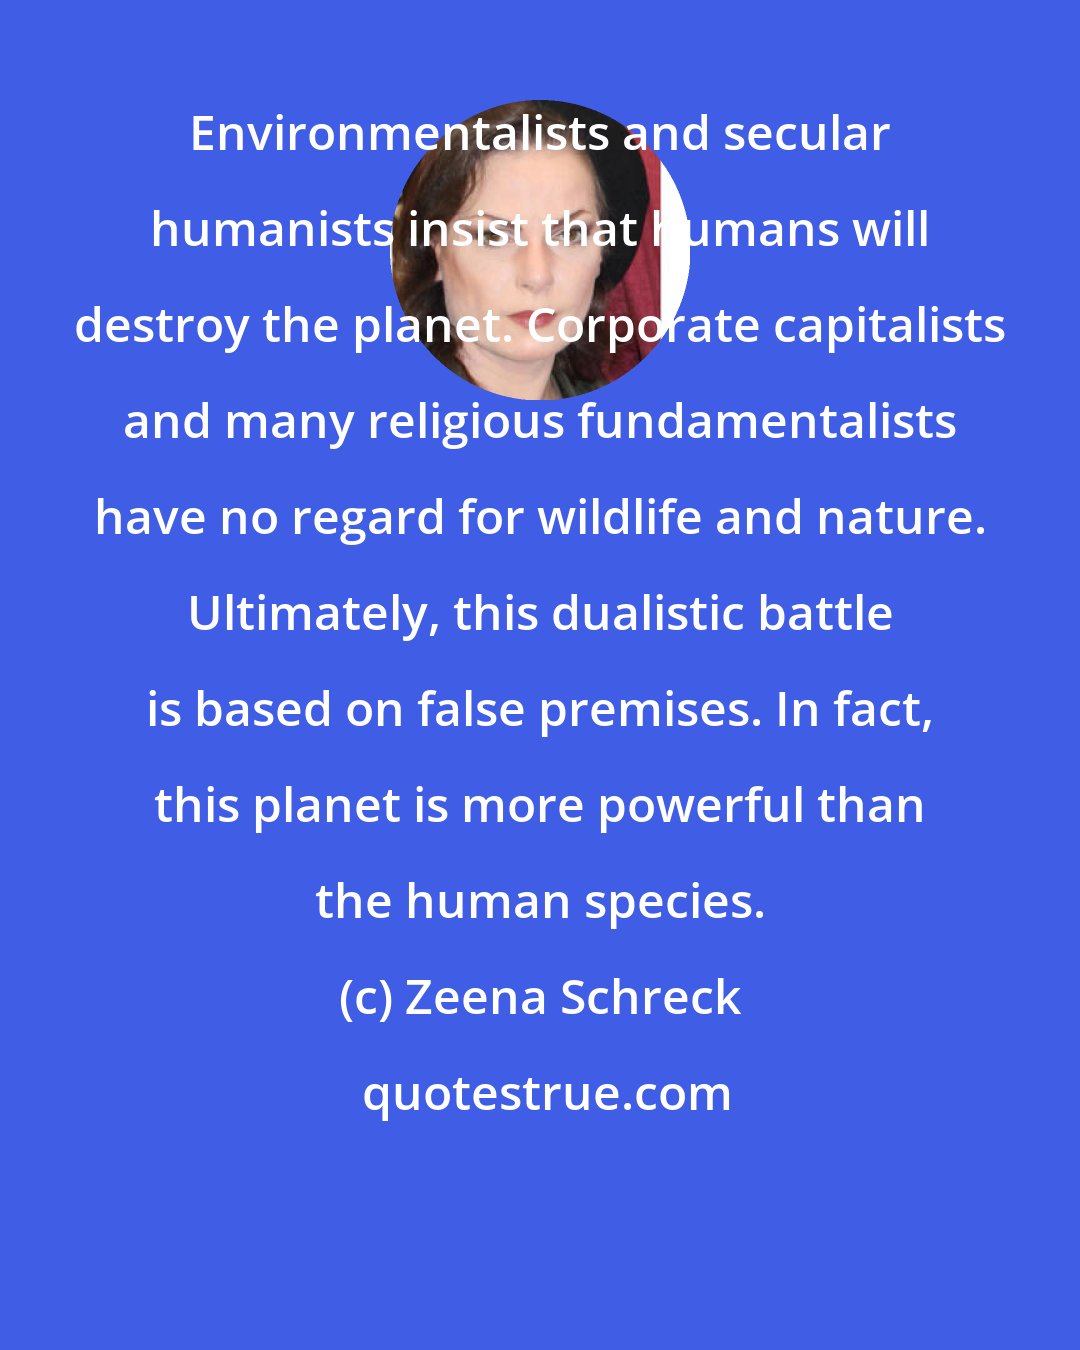 Zeena Schreck: Environmentalists and secular humanists insist that humans will destroy the planet. Corporate capitalists and many religious fundamentalists have no regard for wildlife and nature. Ultimately, this dualistic battle is based on false premises. In fact, this planet is more powerful than the human species.